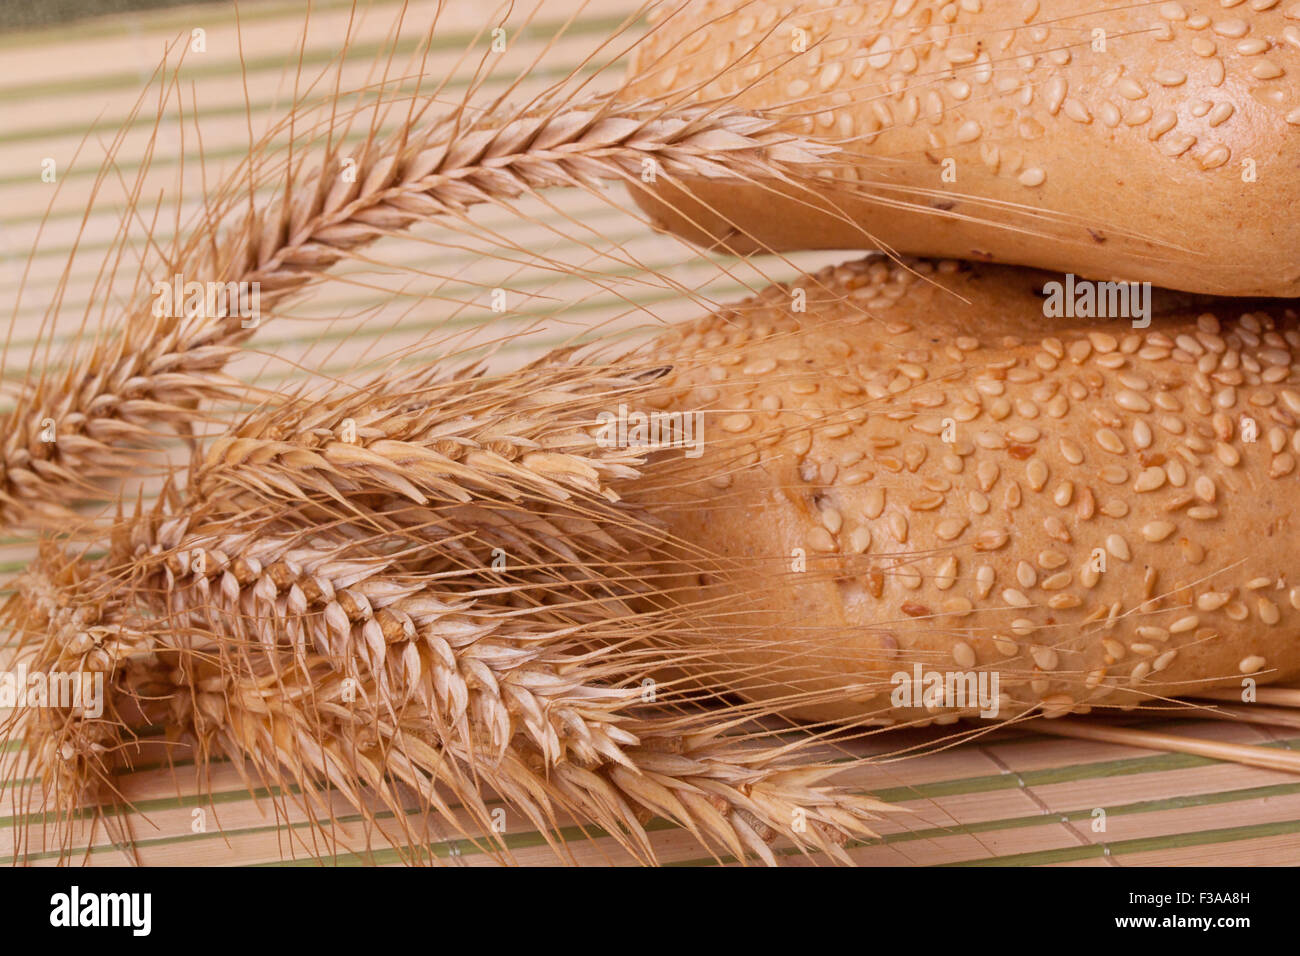 two buns with wheat spikelets on a bamboo mat Stock Photo